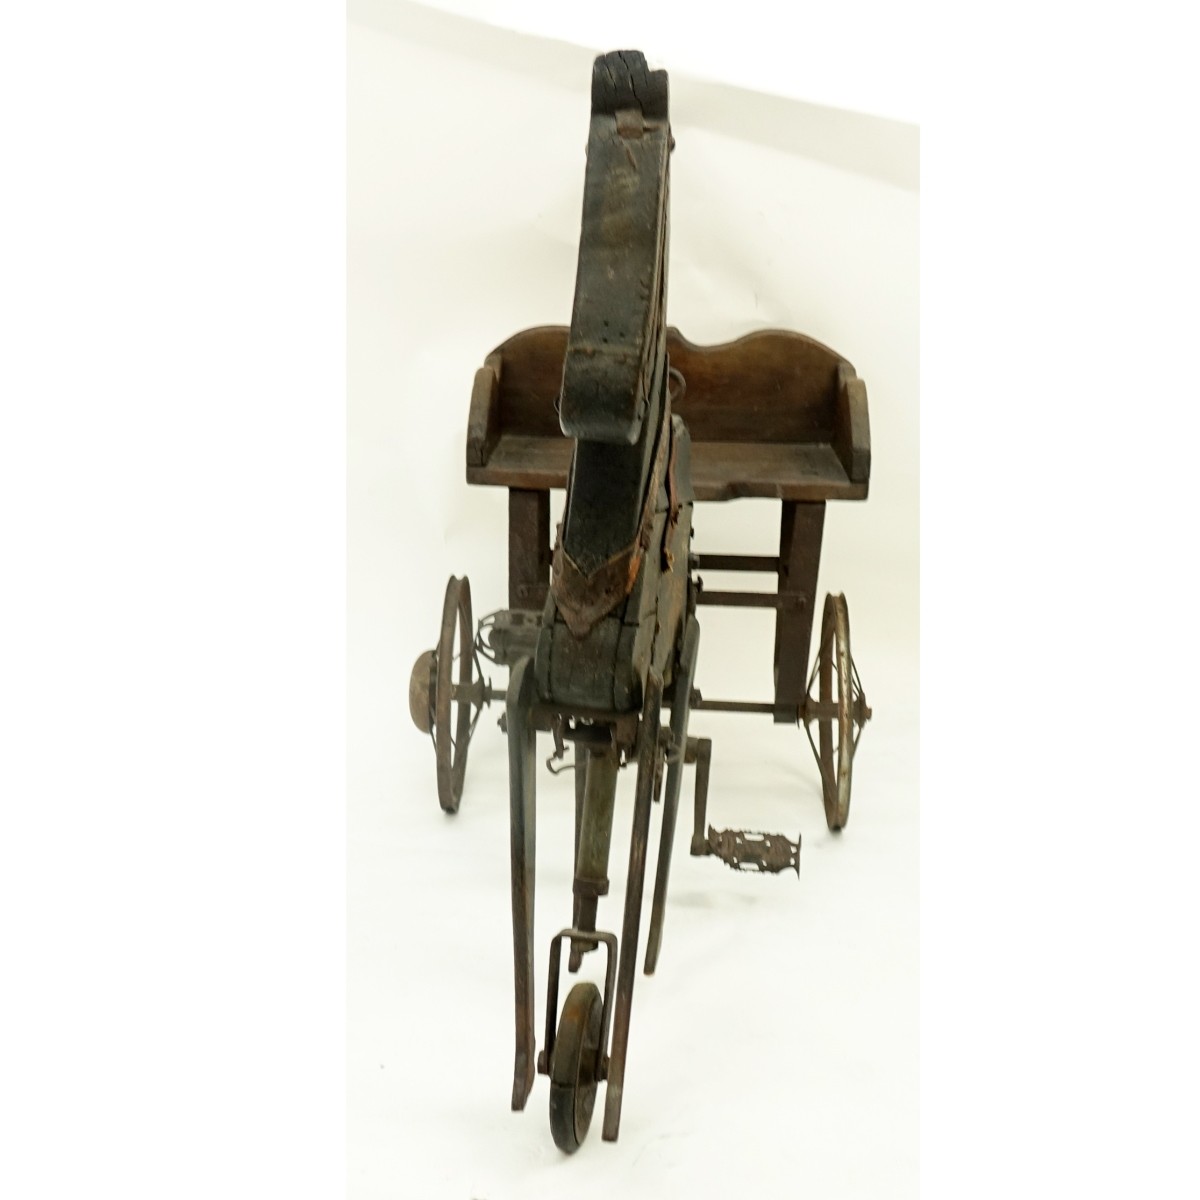 Antique Childs Pedal Horse & Buggy